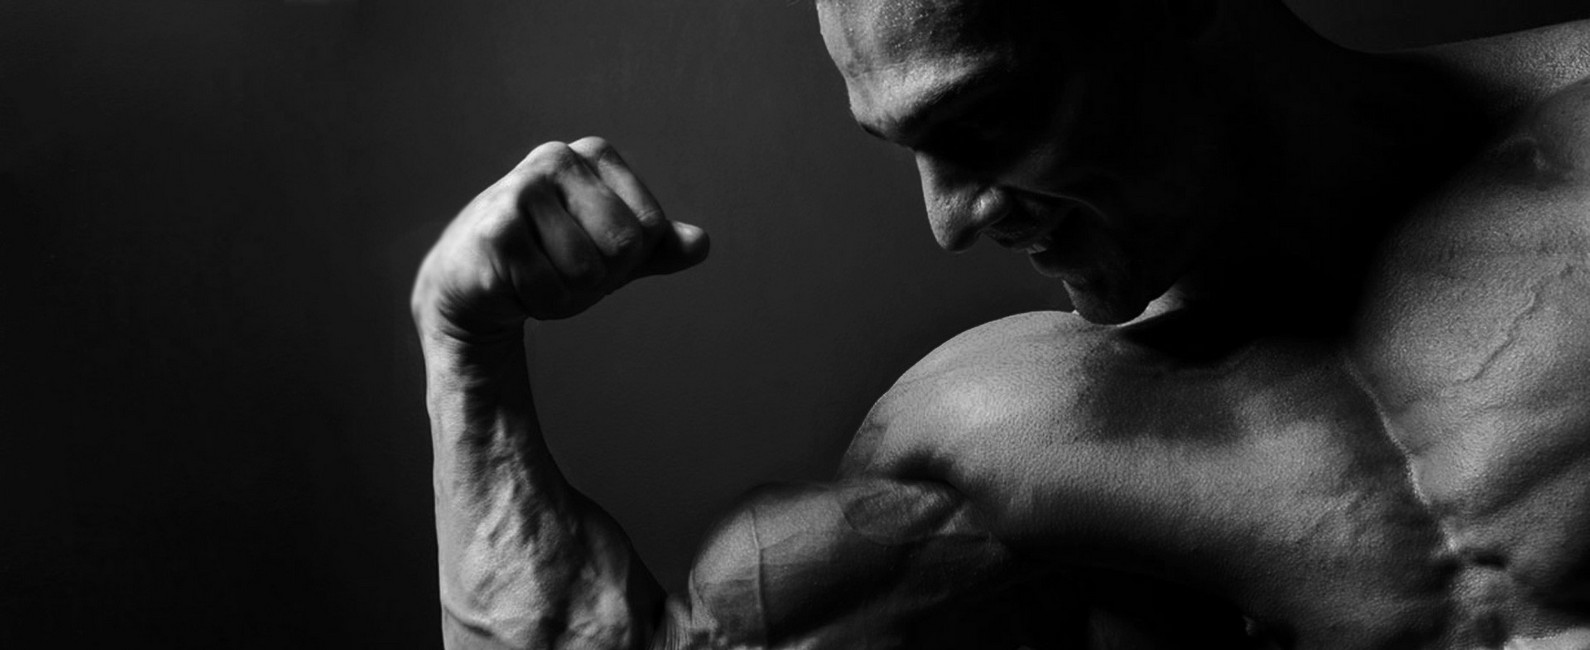 What ingredients are in sarms